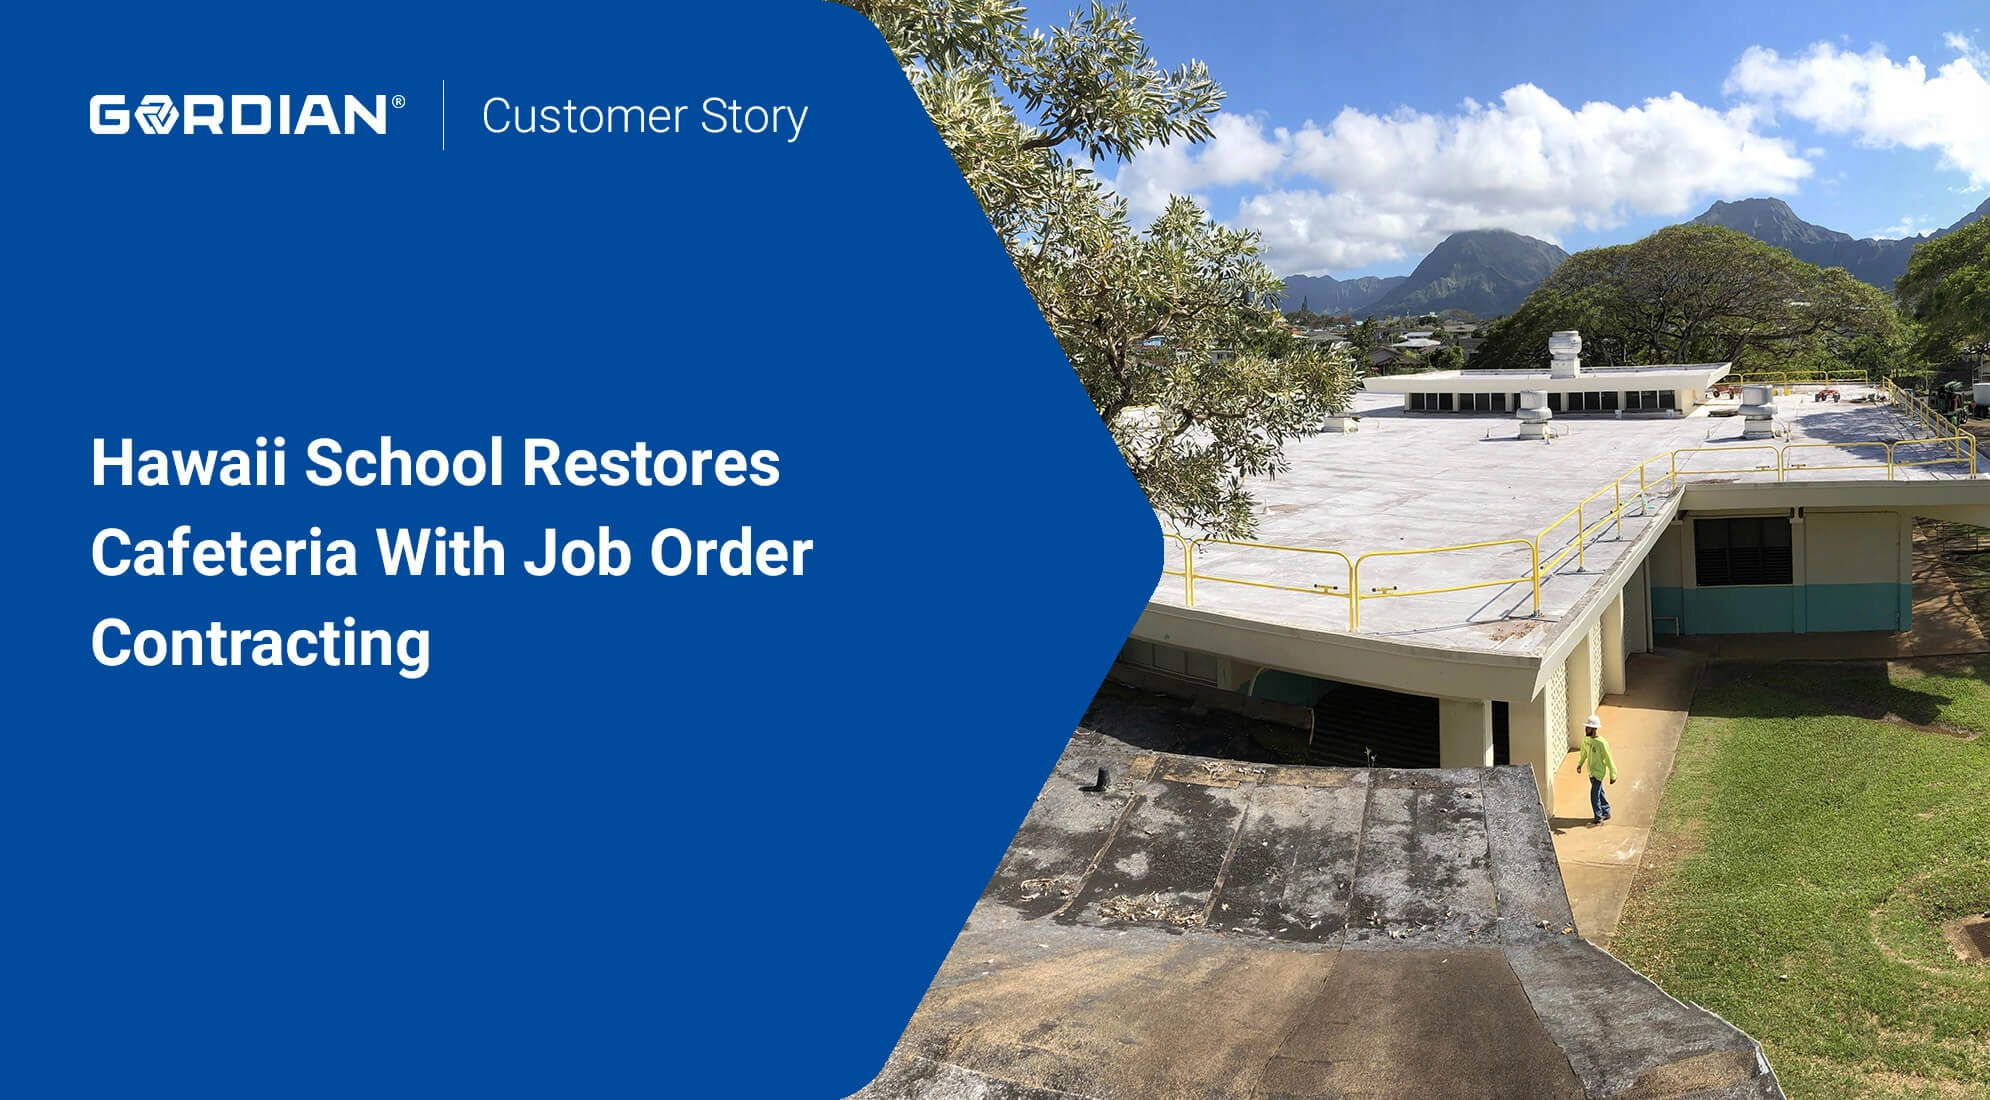 Hawaii School Leverages Job Order Contracting to Revamp Cafeteria Quickly 2